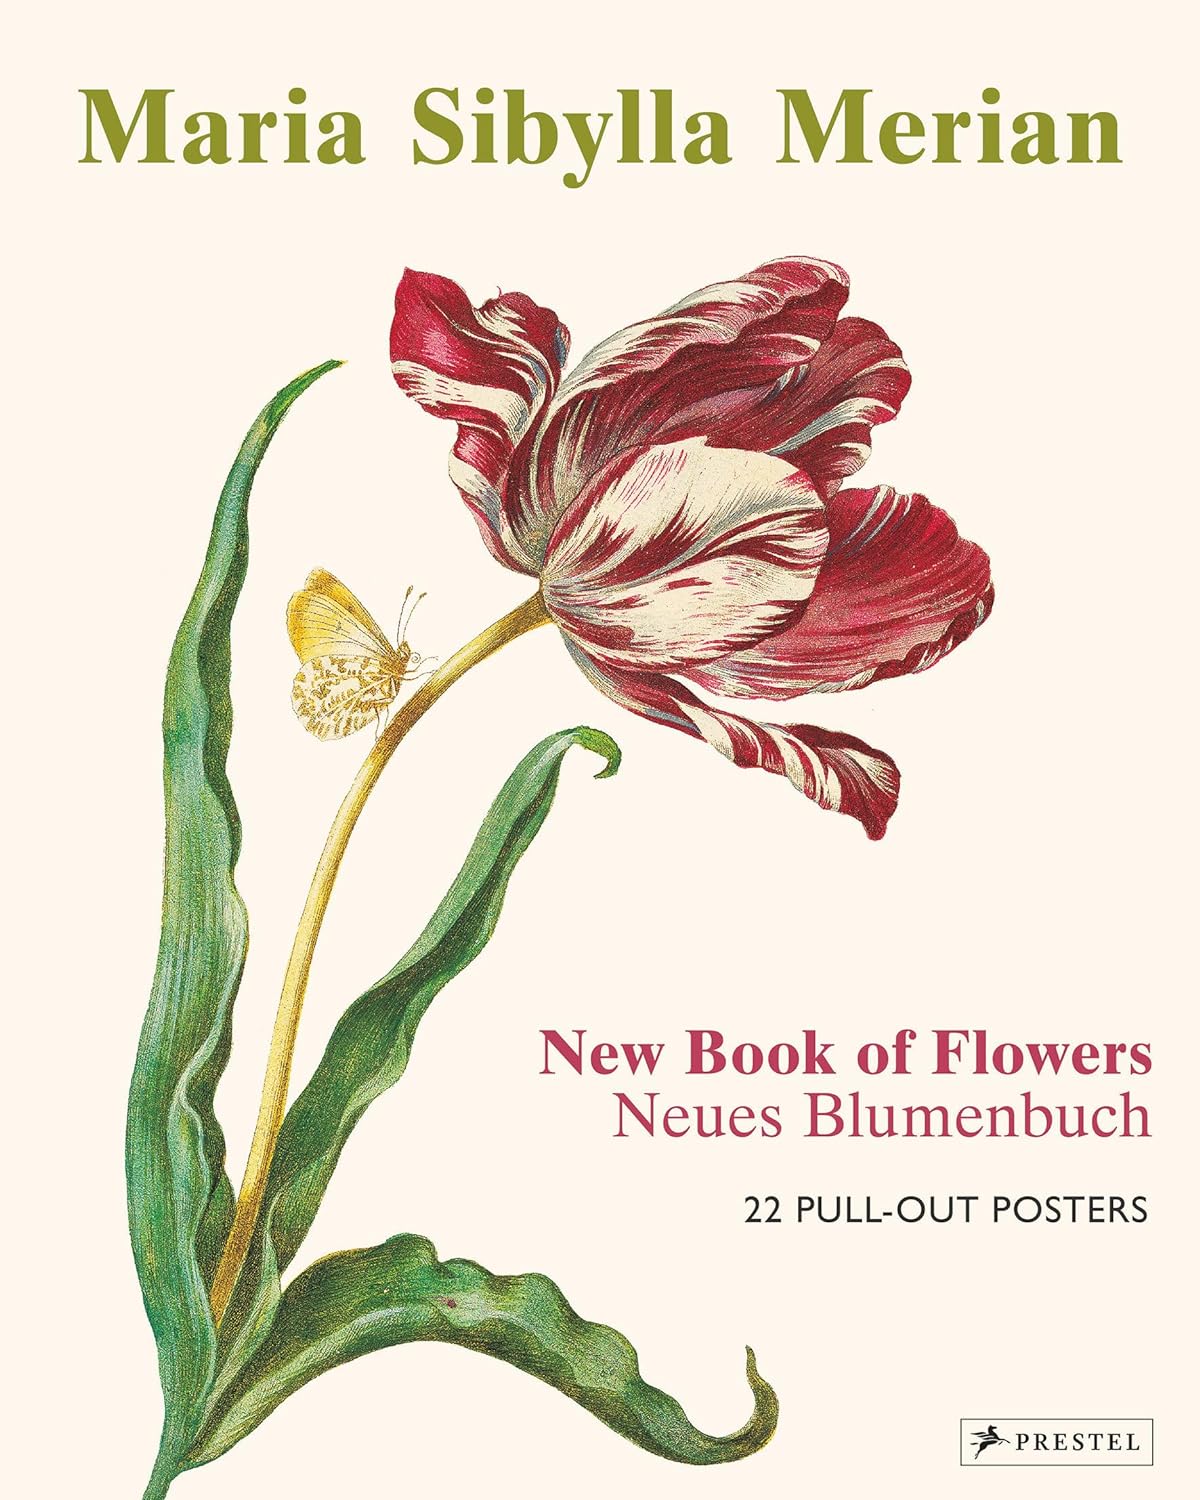 The New Book of Flowers - Maria Sibylla Merian